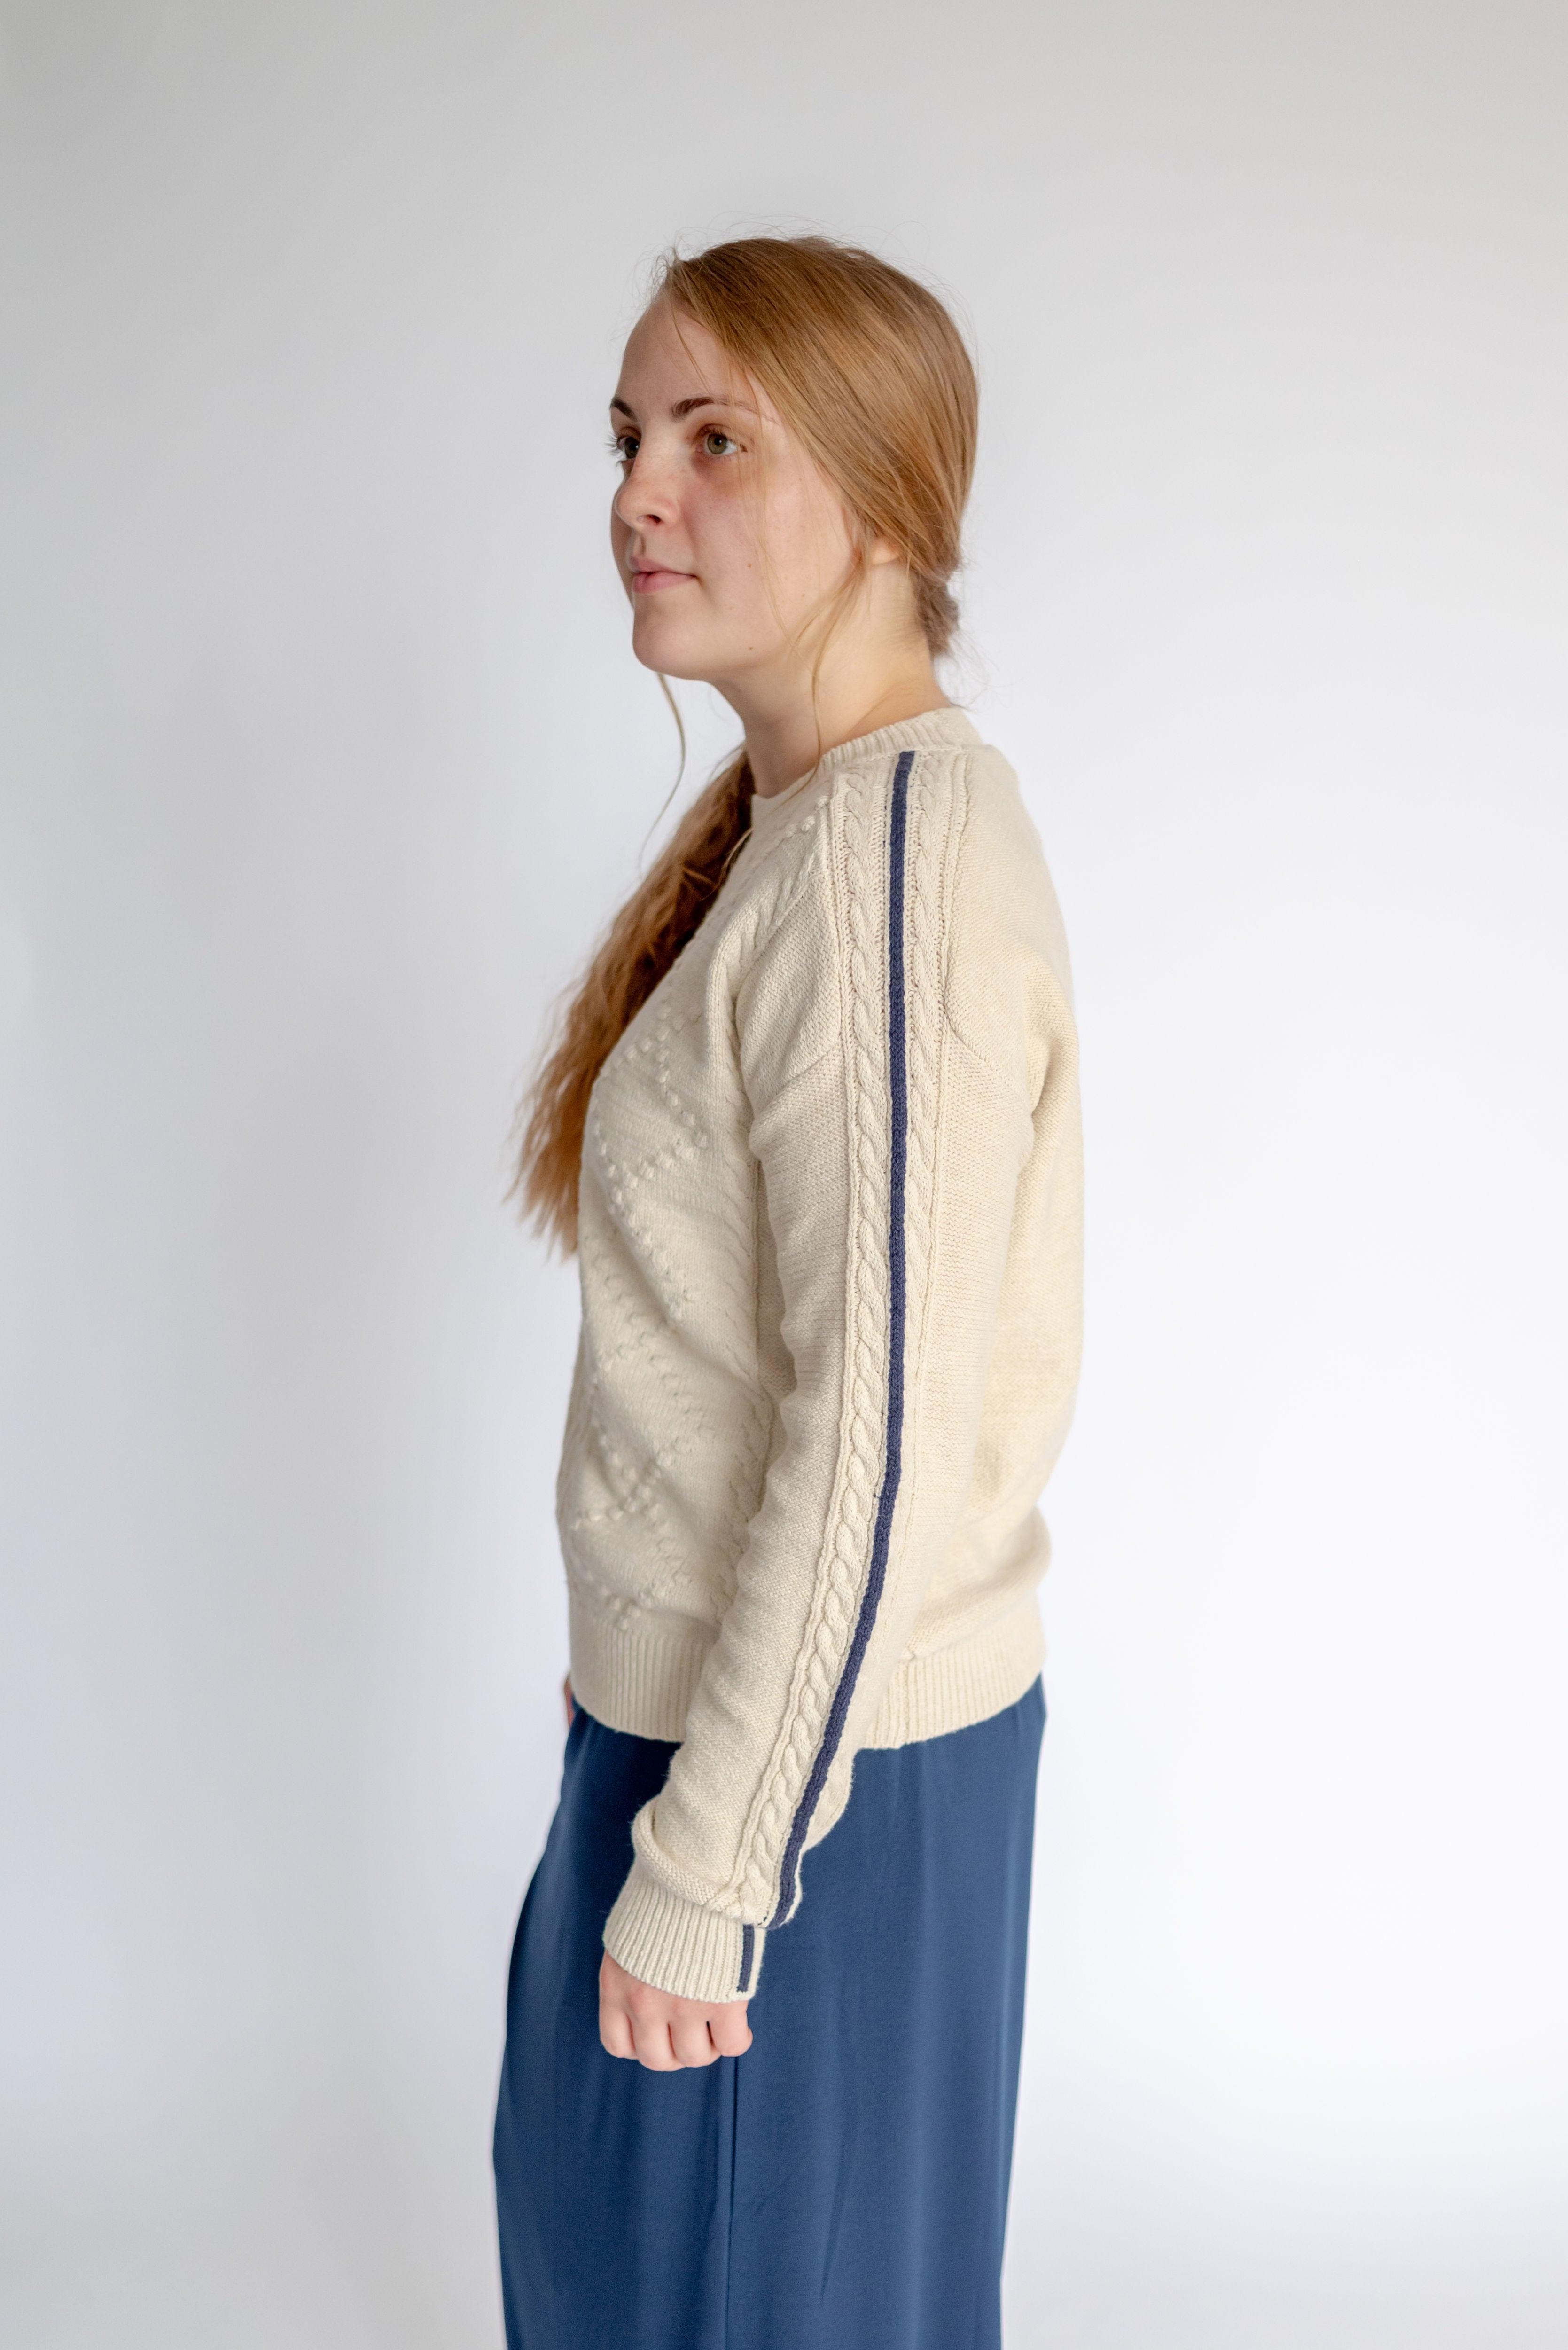 Carly Cable Knit Sweater in Almond - Carly Cable Knit Sweater in Almond - undefined - Salt and Honey